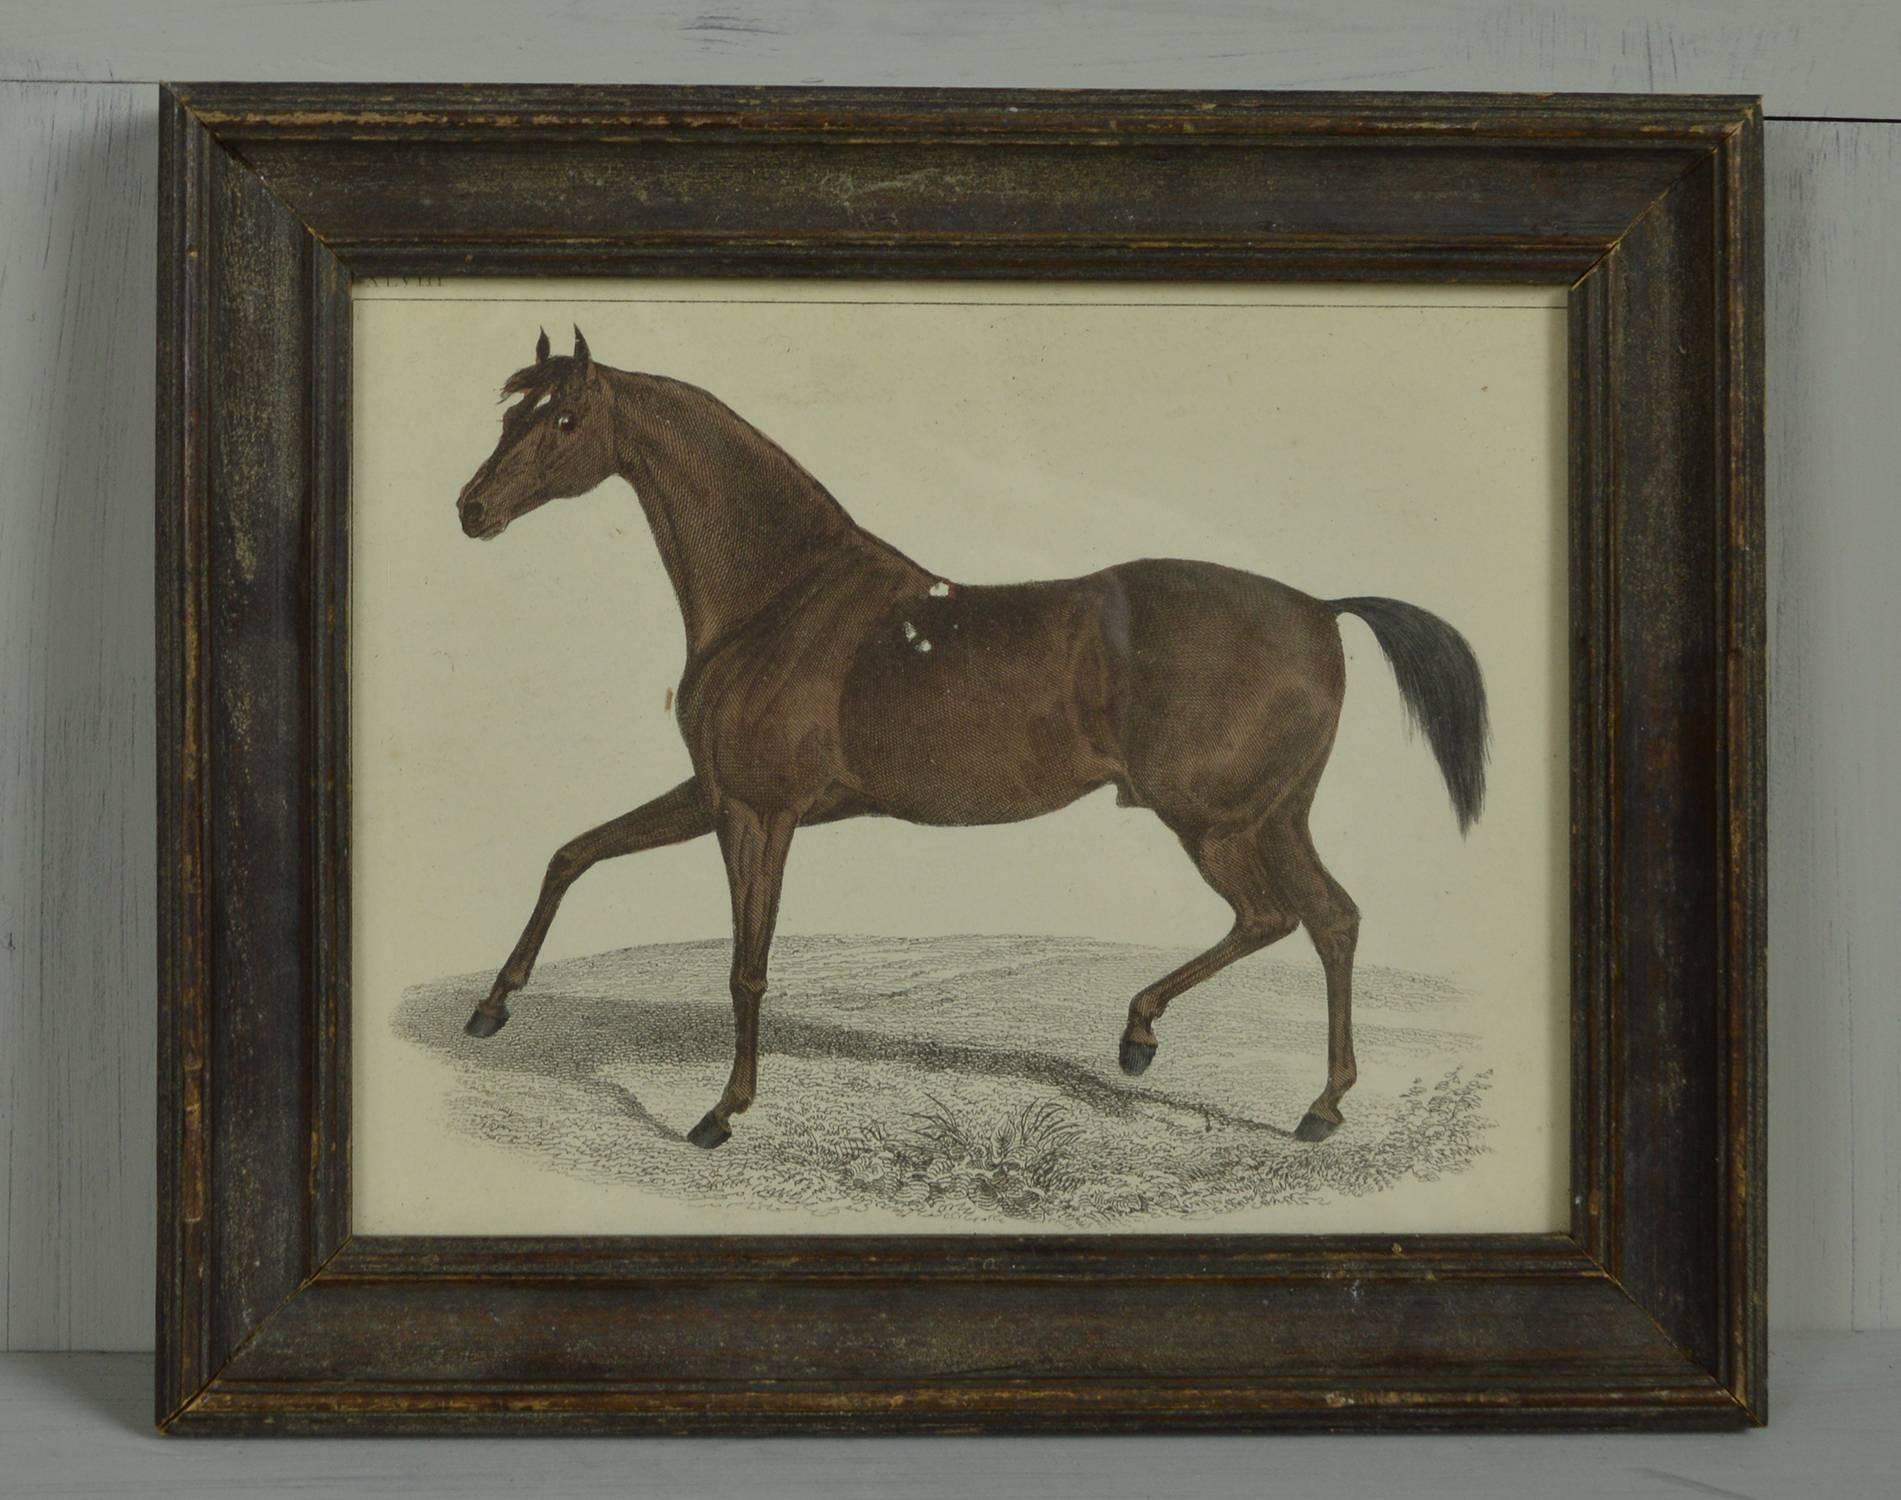 Great image of a horse.

Hand-colored lithograph.

Original color.

From Goldsmith's Animated Nature.

Published by Fullarton, London and Edinburgh, 1847.

Presented in an antique stained wood frame.

The measurement given below is the